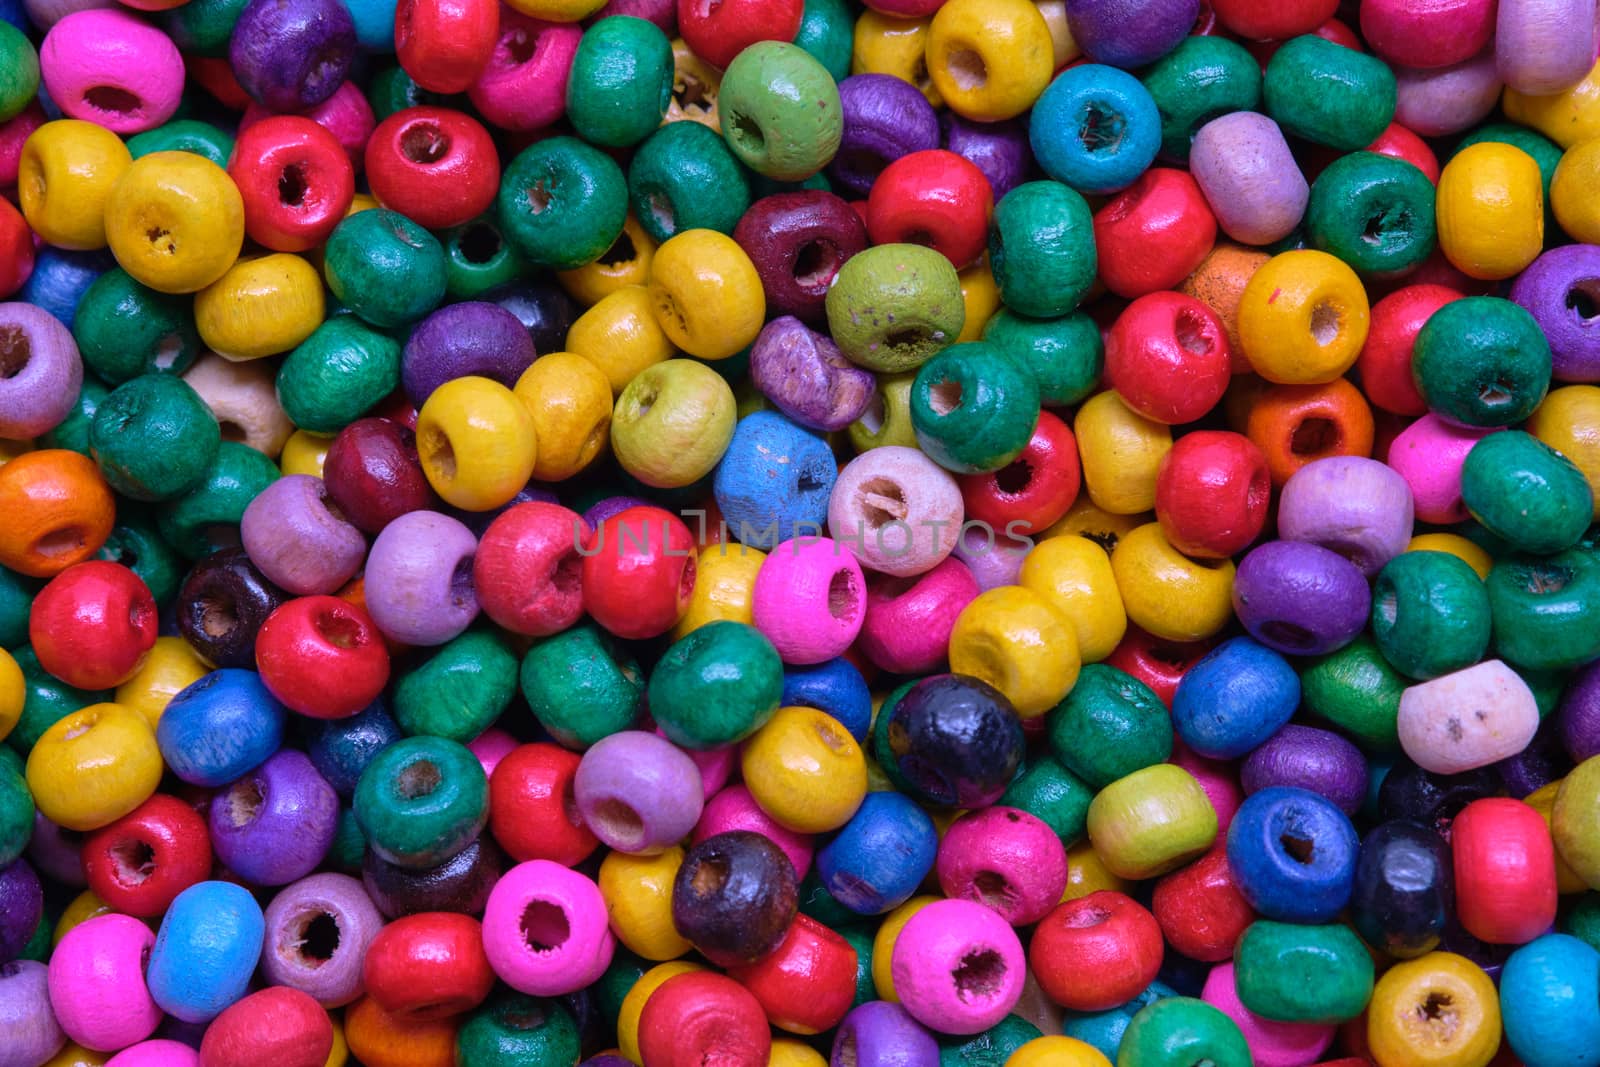 Various sewing Colorful wooden beads as background.